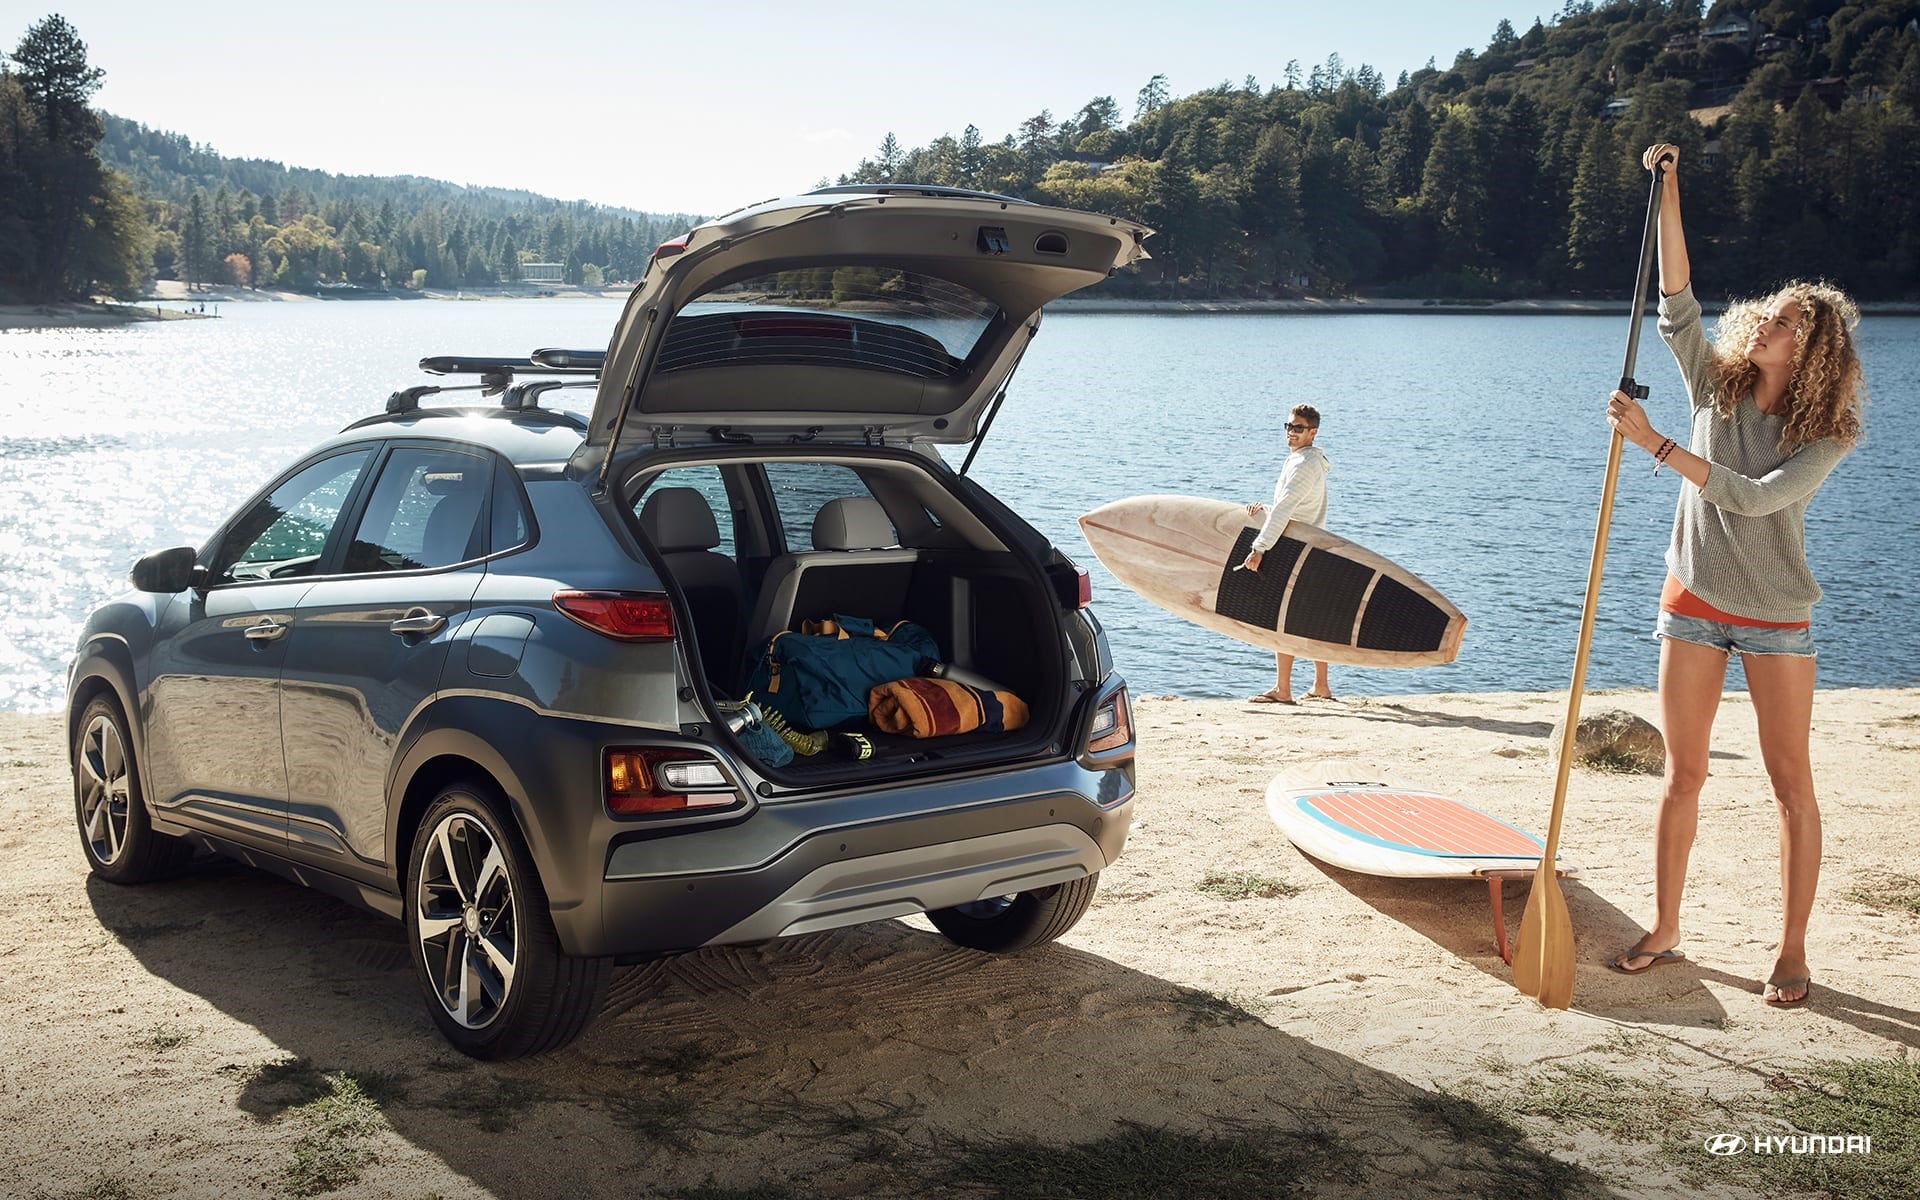 Is the Hyundai Kona the Right SUV for Your Road Trip?